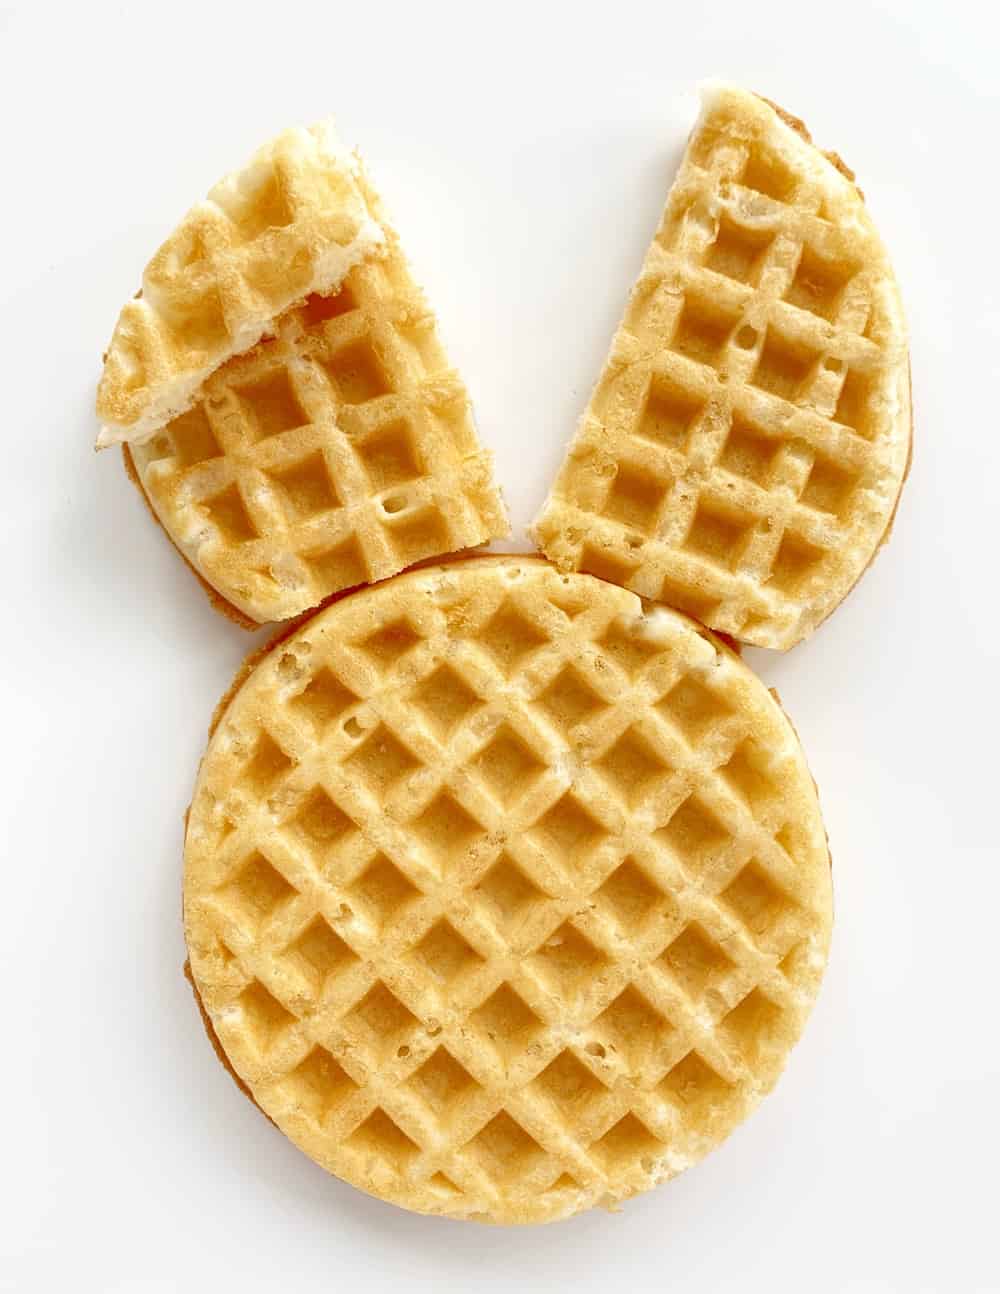 You Can Get a Bunny-Shaped Waffle Maker for the Ideal Easter Brunch